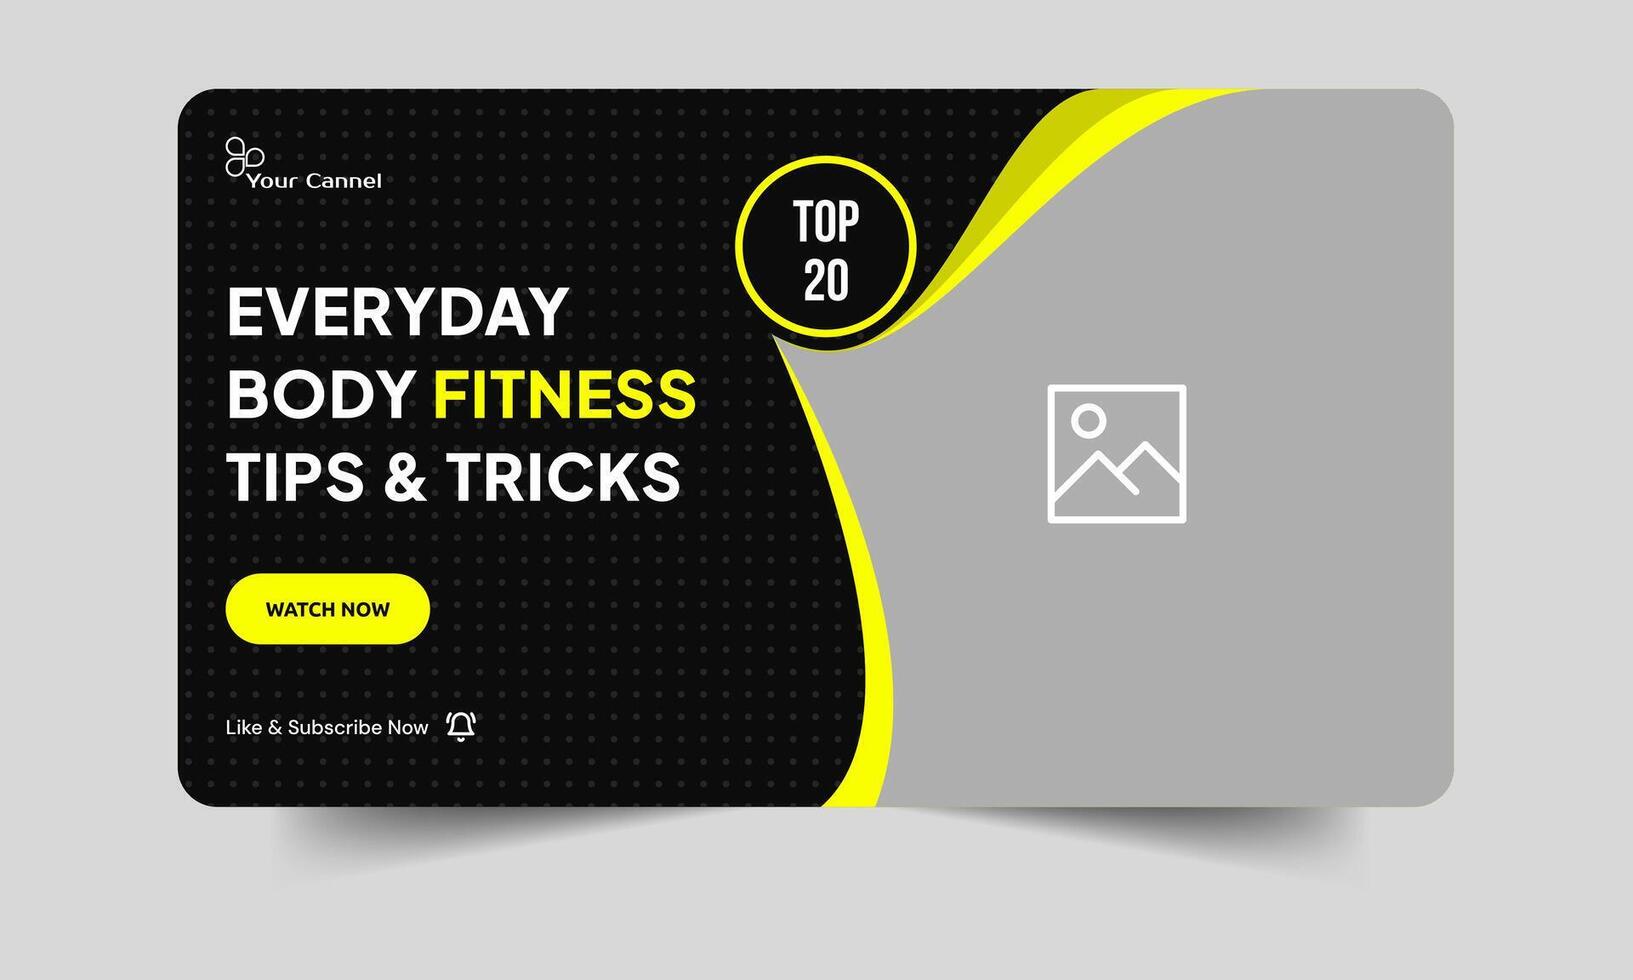 Abstract body fitness techniques cover banner design, daily best fitness tips and tricks thumbnail banner design, customizable eps 10 file format vector